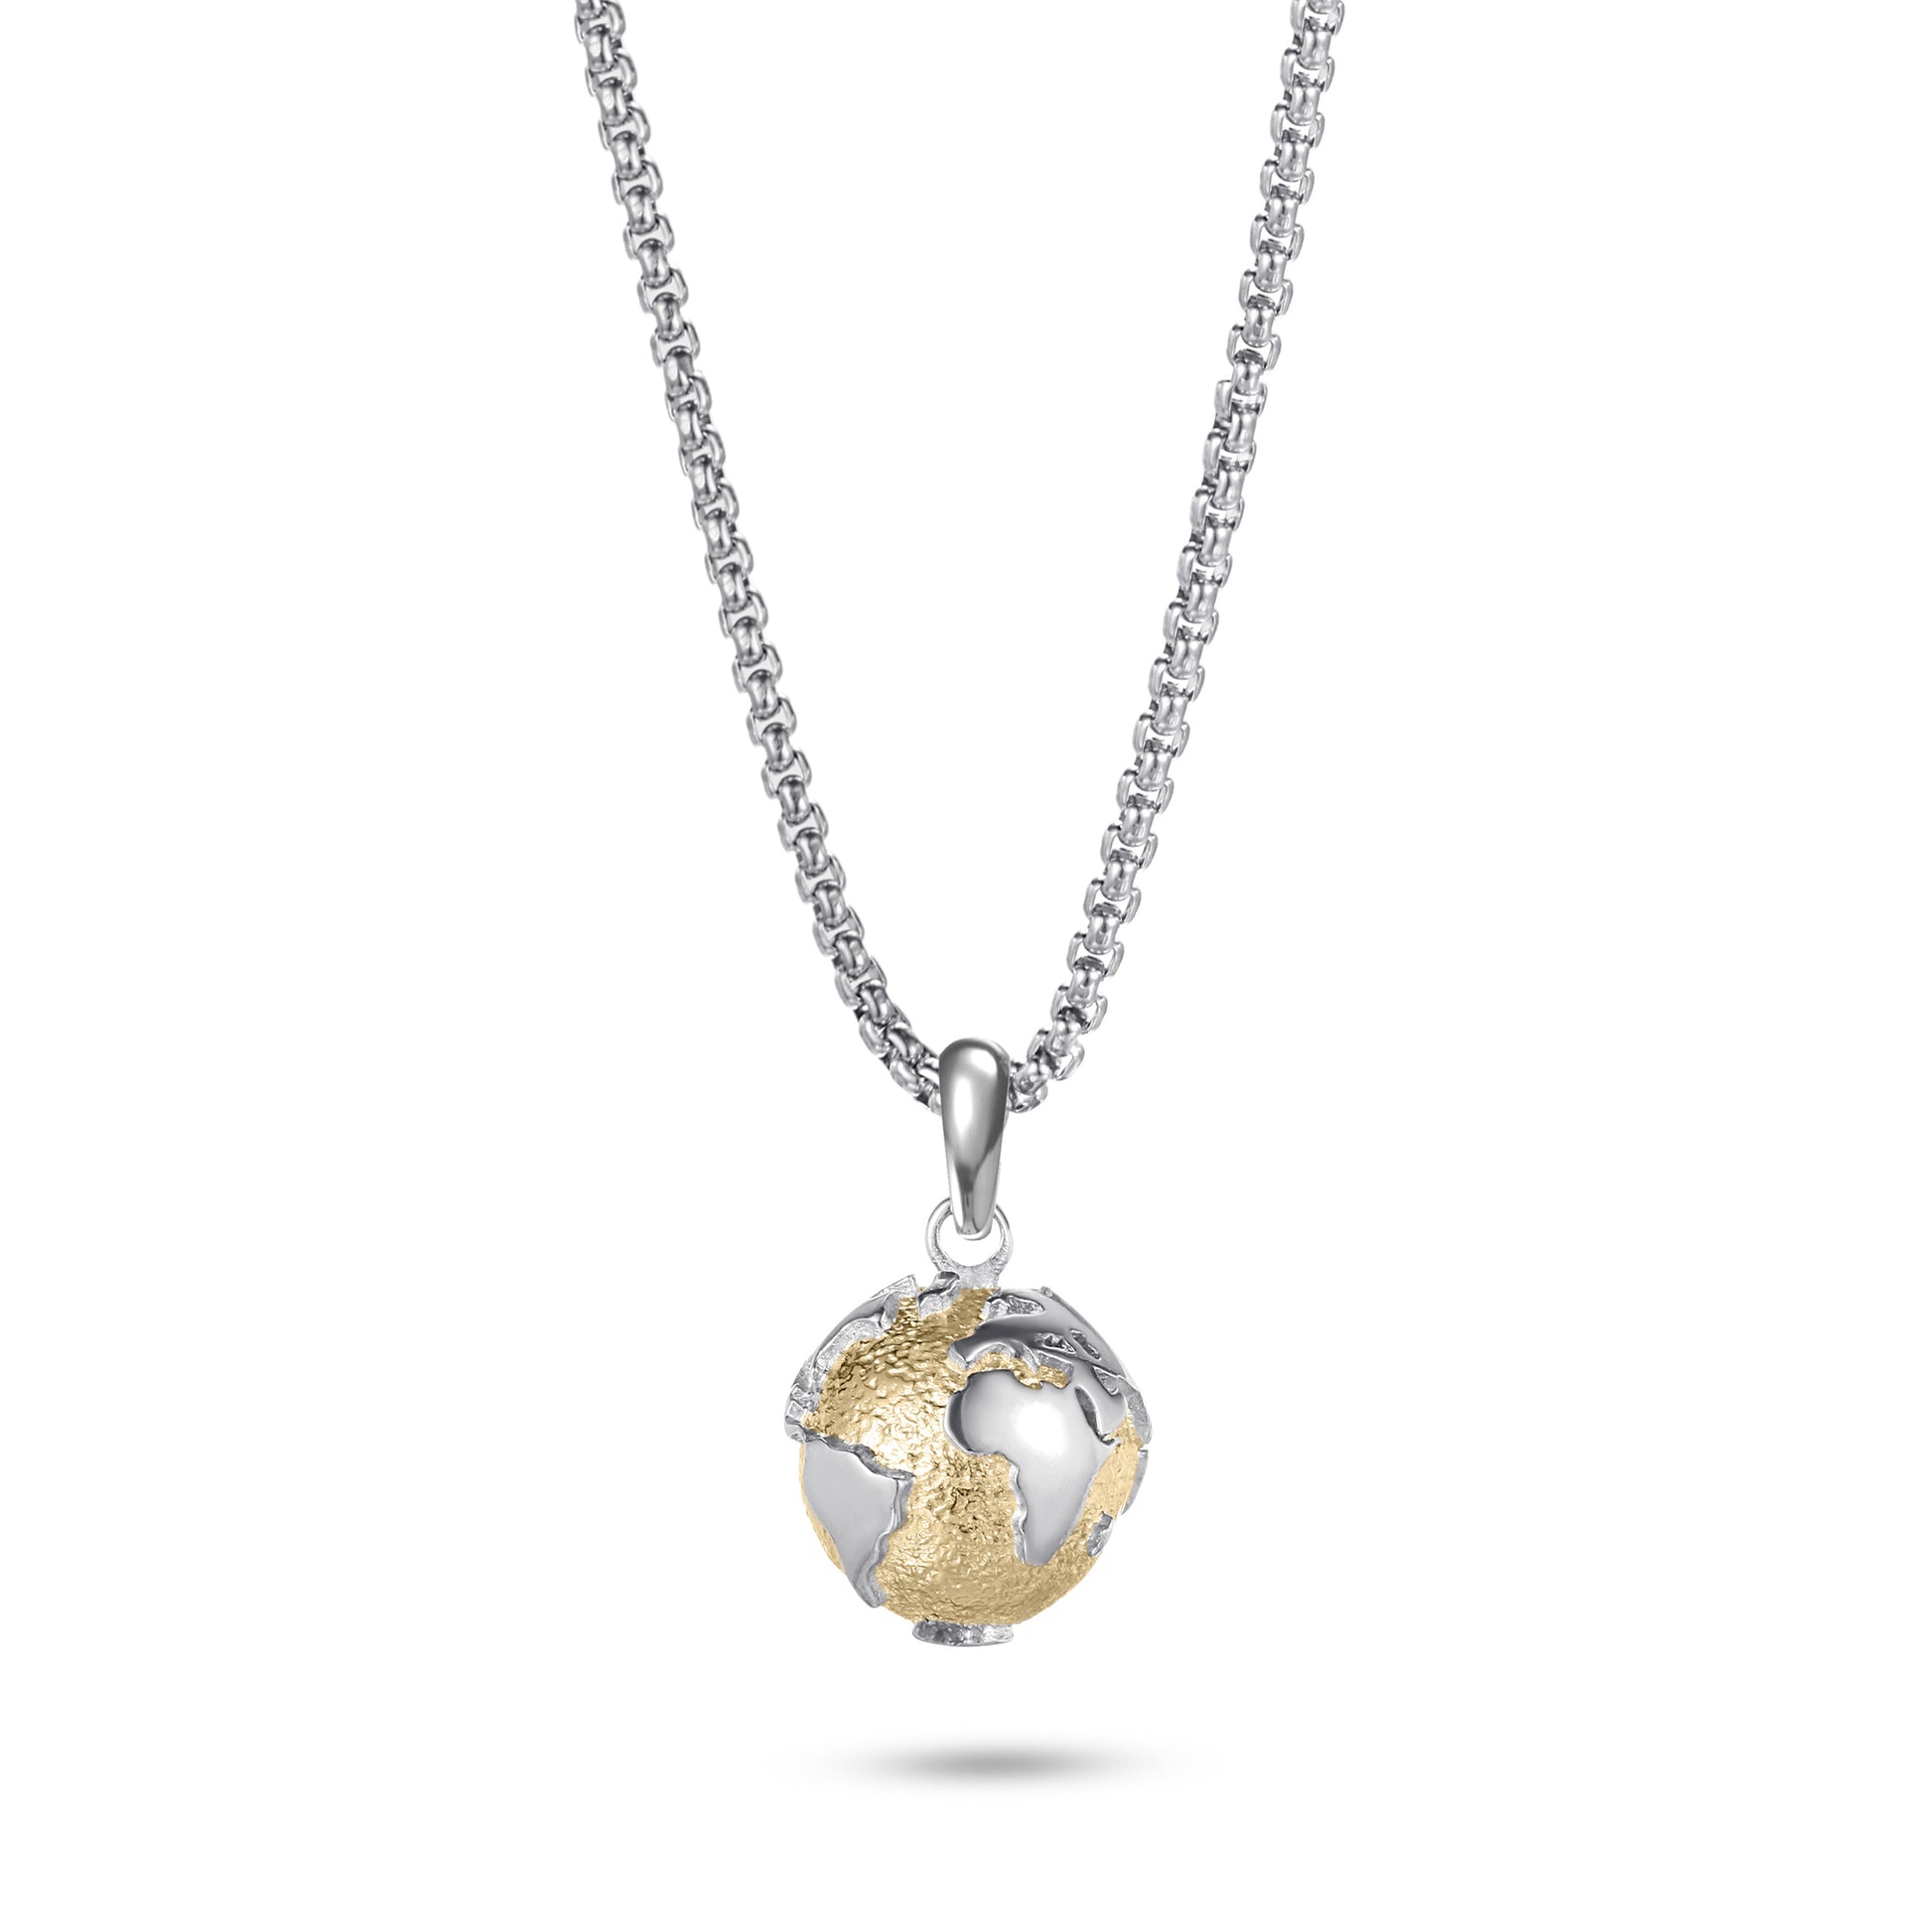 KINGKA Stainless Steel Necklace, Silver Gold, The Earth - KINGKA Jewelry